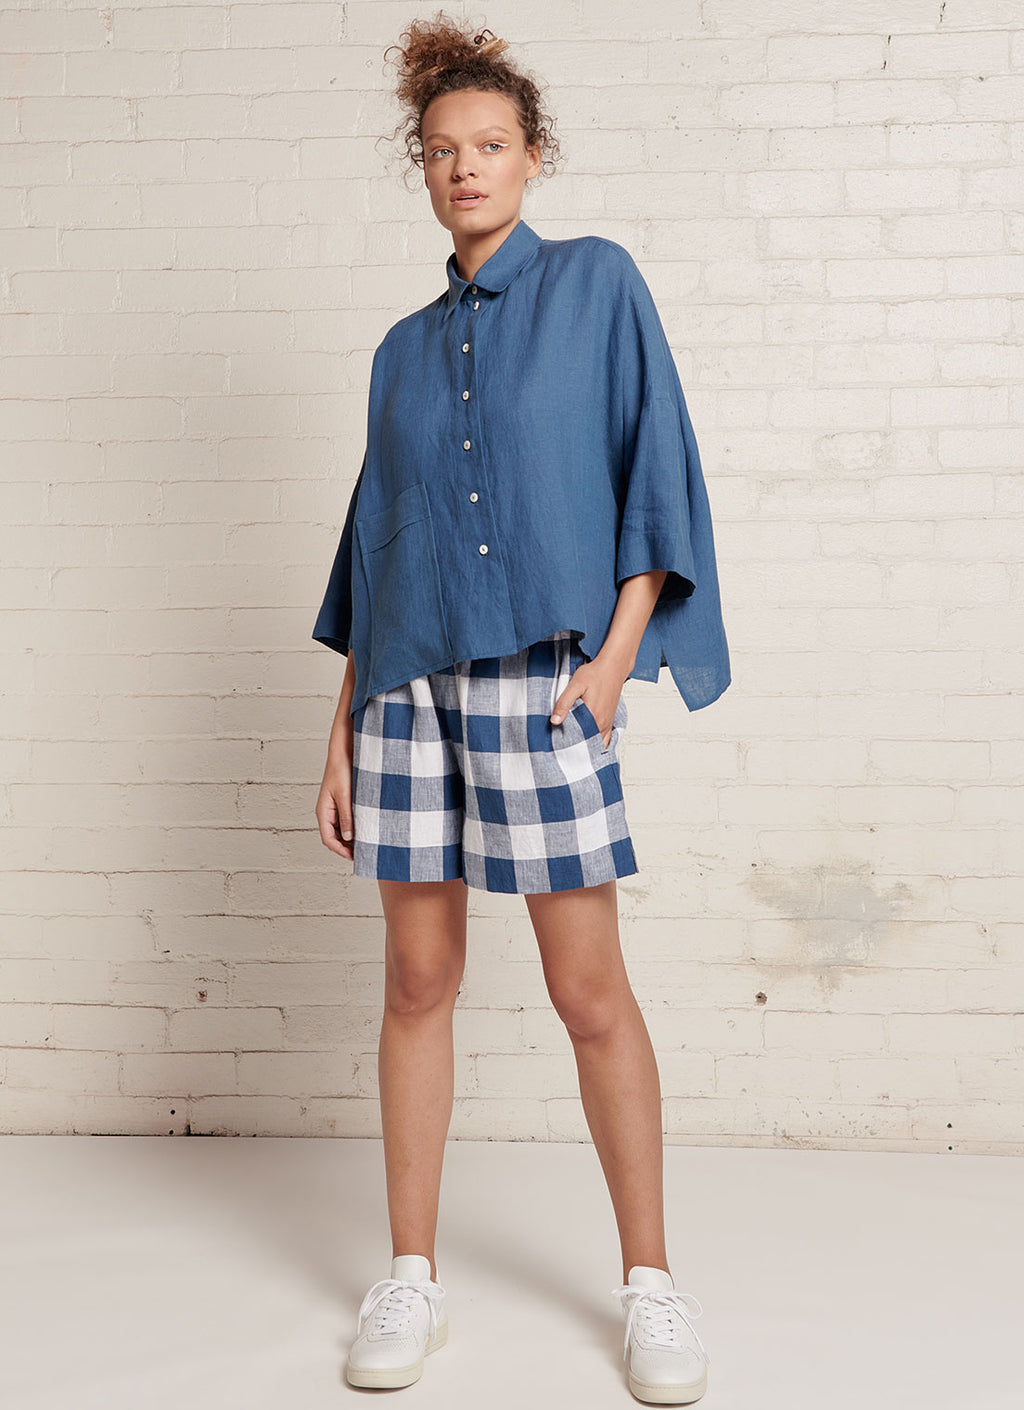 An indigo and white gingham shorts with elasticated waistband and pockets made from large gingham yarn dye washed linen